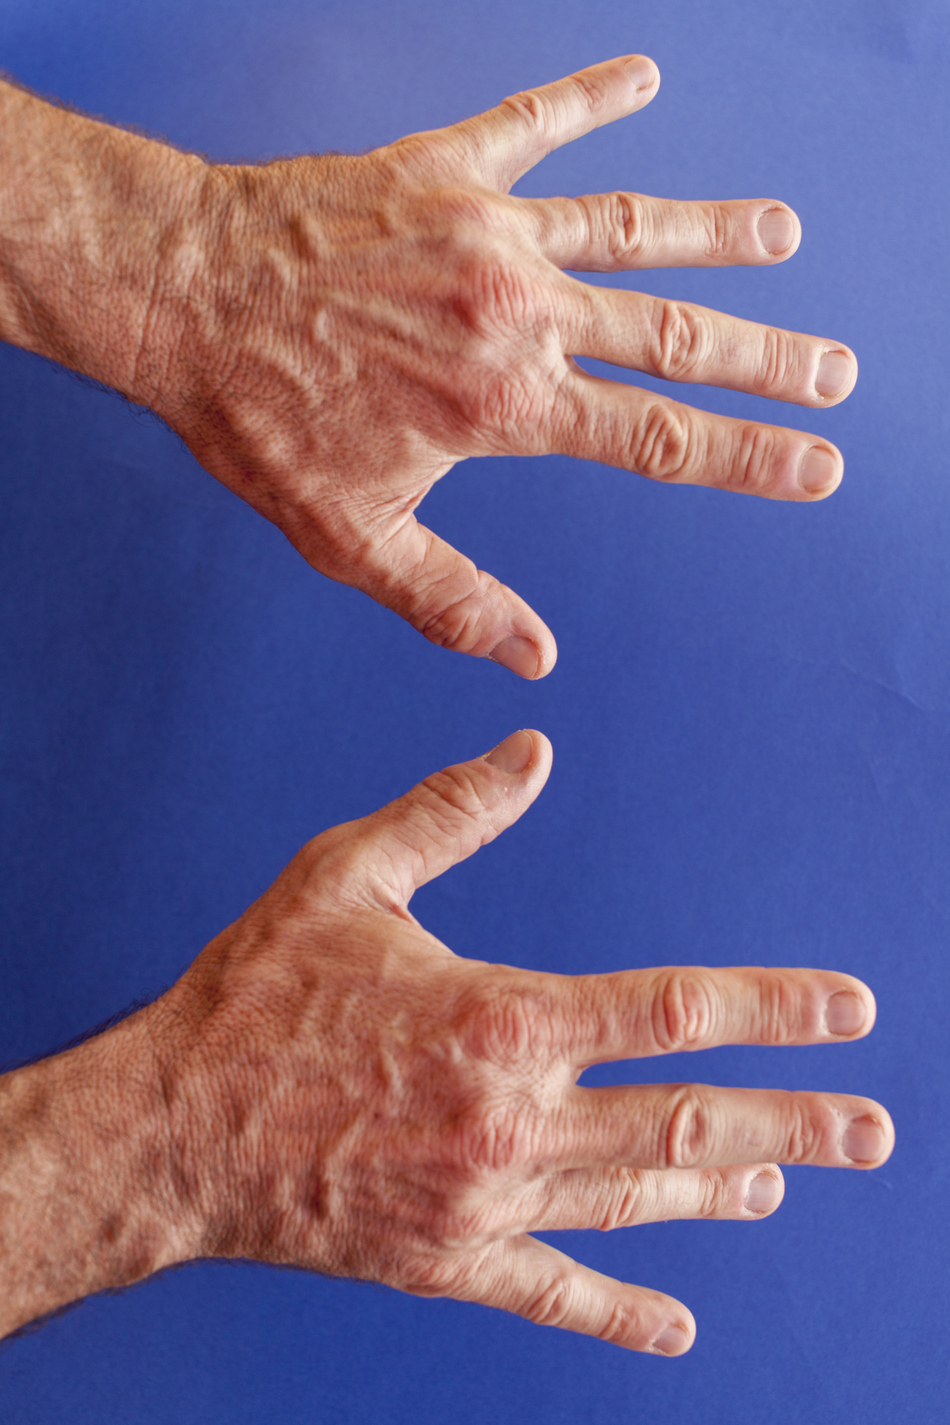 Treating Dupuytrens Contracture